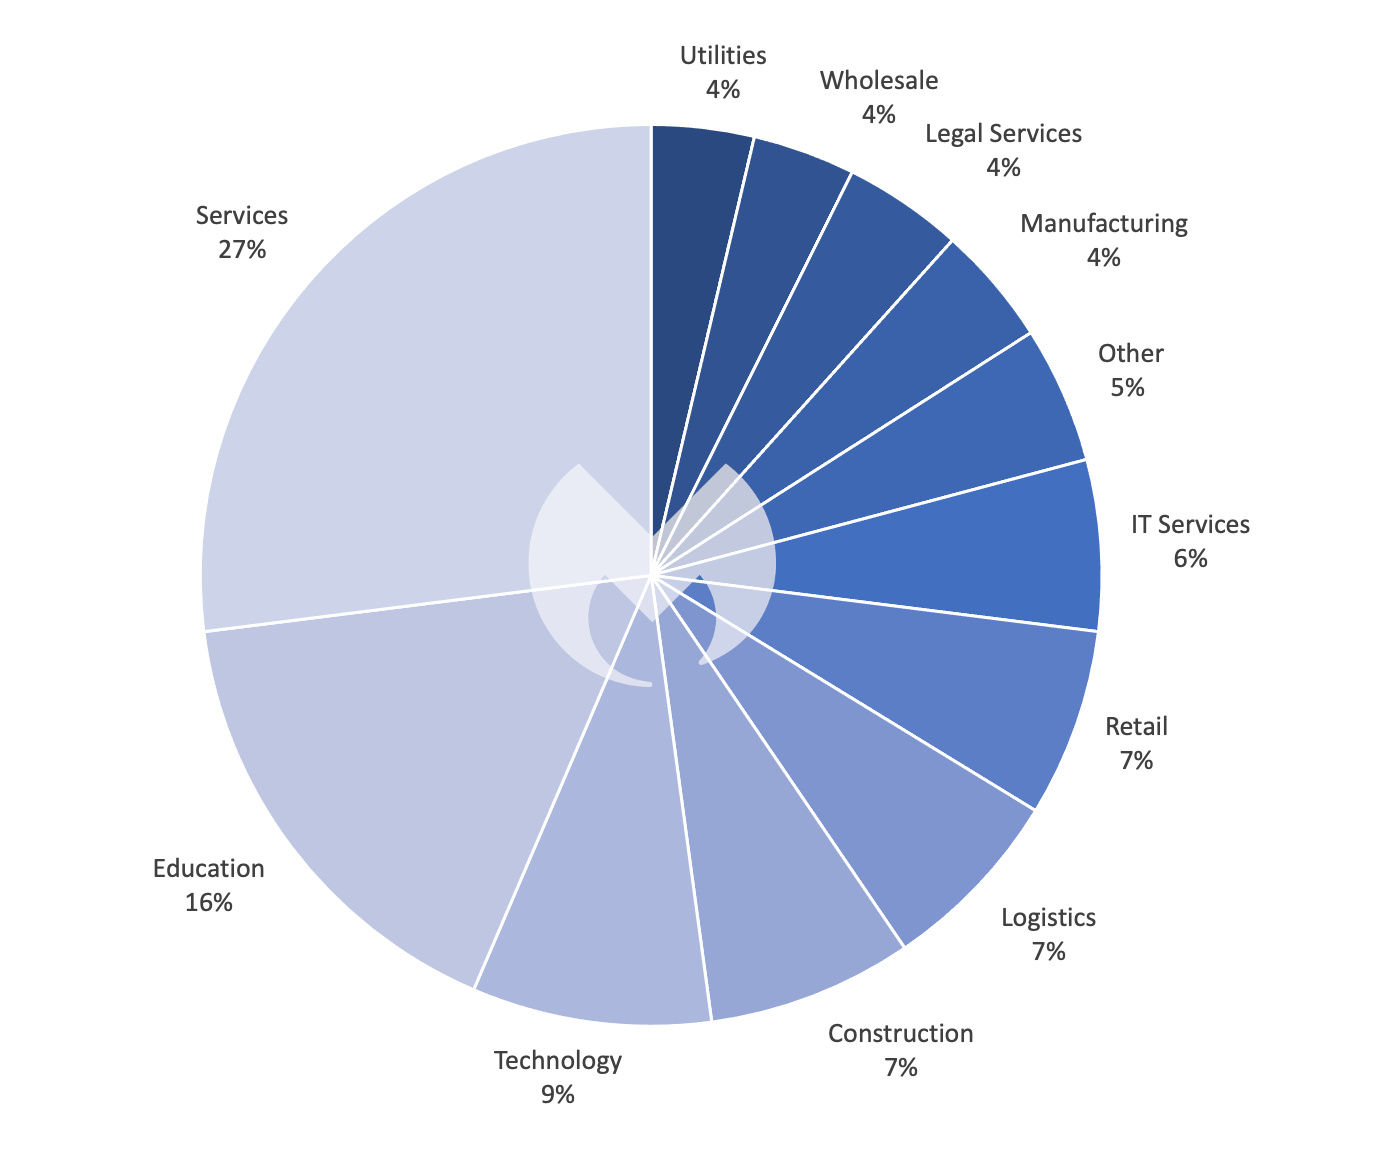 Known ransomware attacks by industry sector in the UK, April 2022 - March 2023